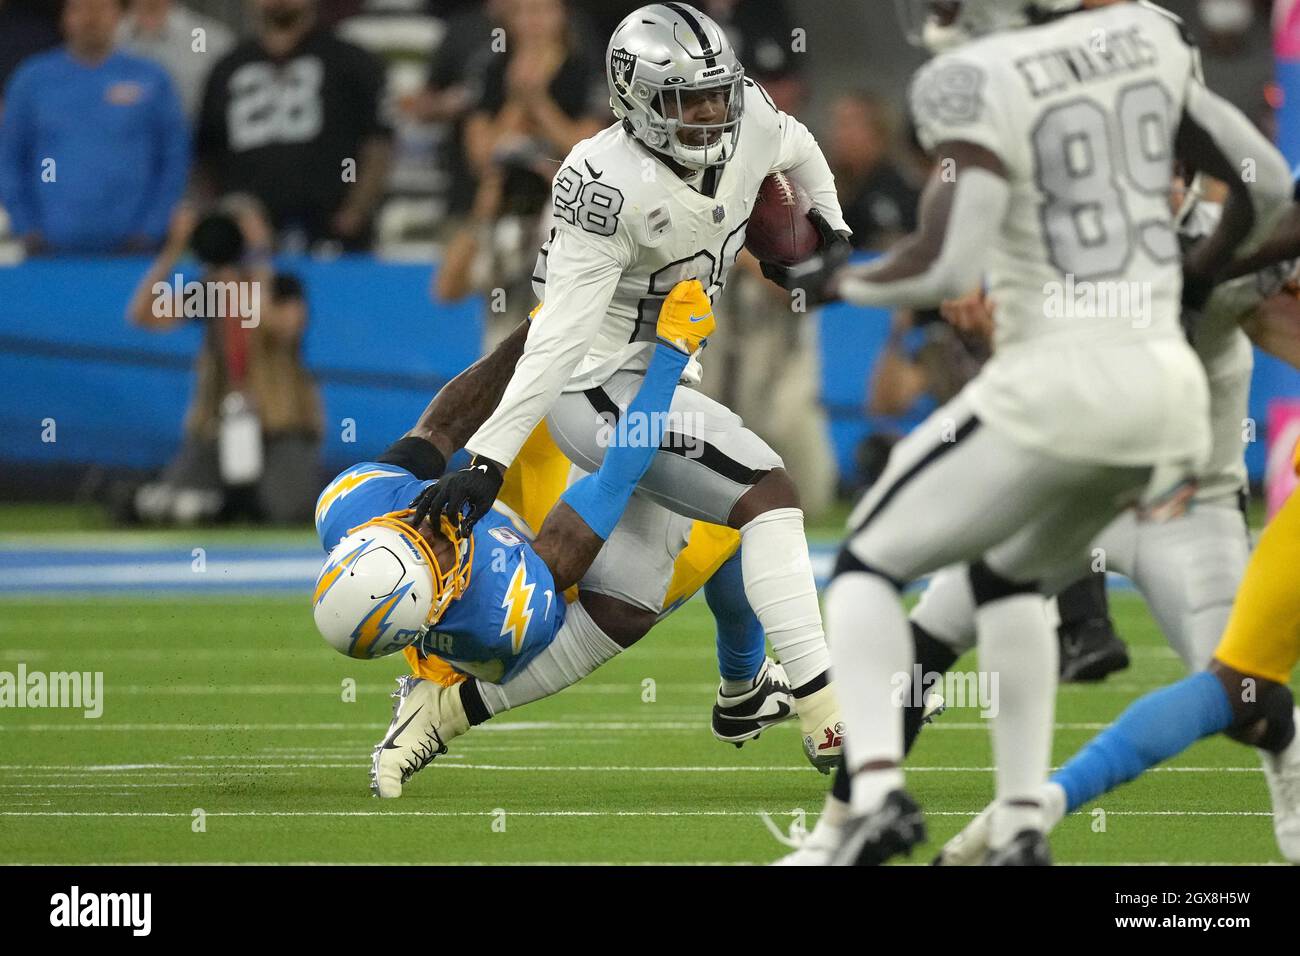 Los Angeles Chargers safety Derwin James Jr. (3) in action during an NFL  football game against the Las Vegas Raiders, Sunday, September 11, 2022 in  Inglewood, Calif. The Chargers defeated the Raiders